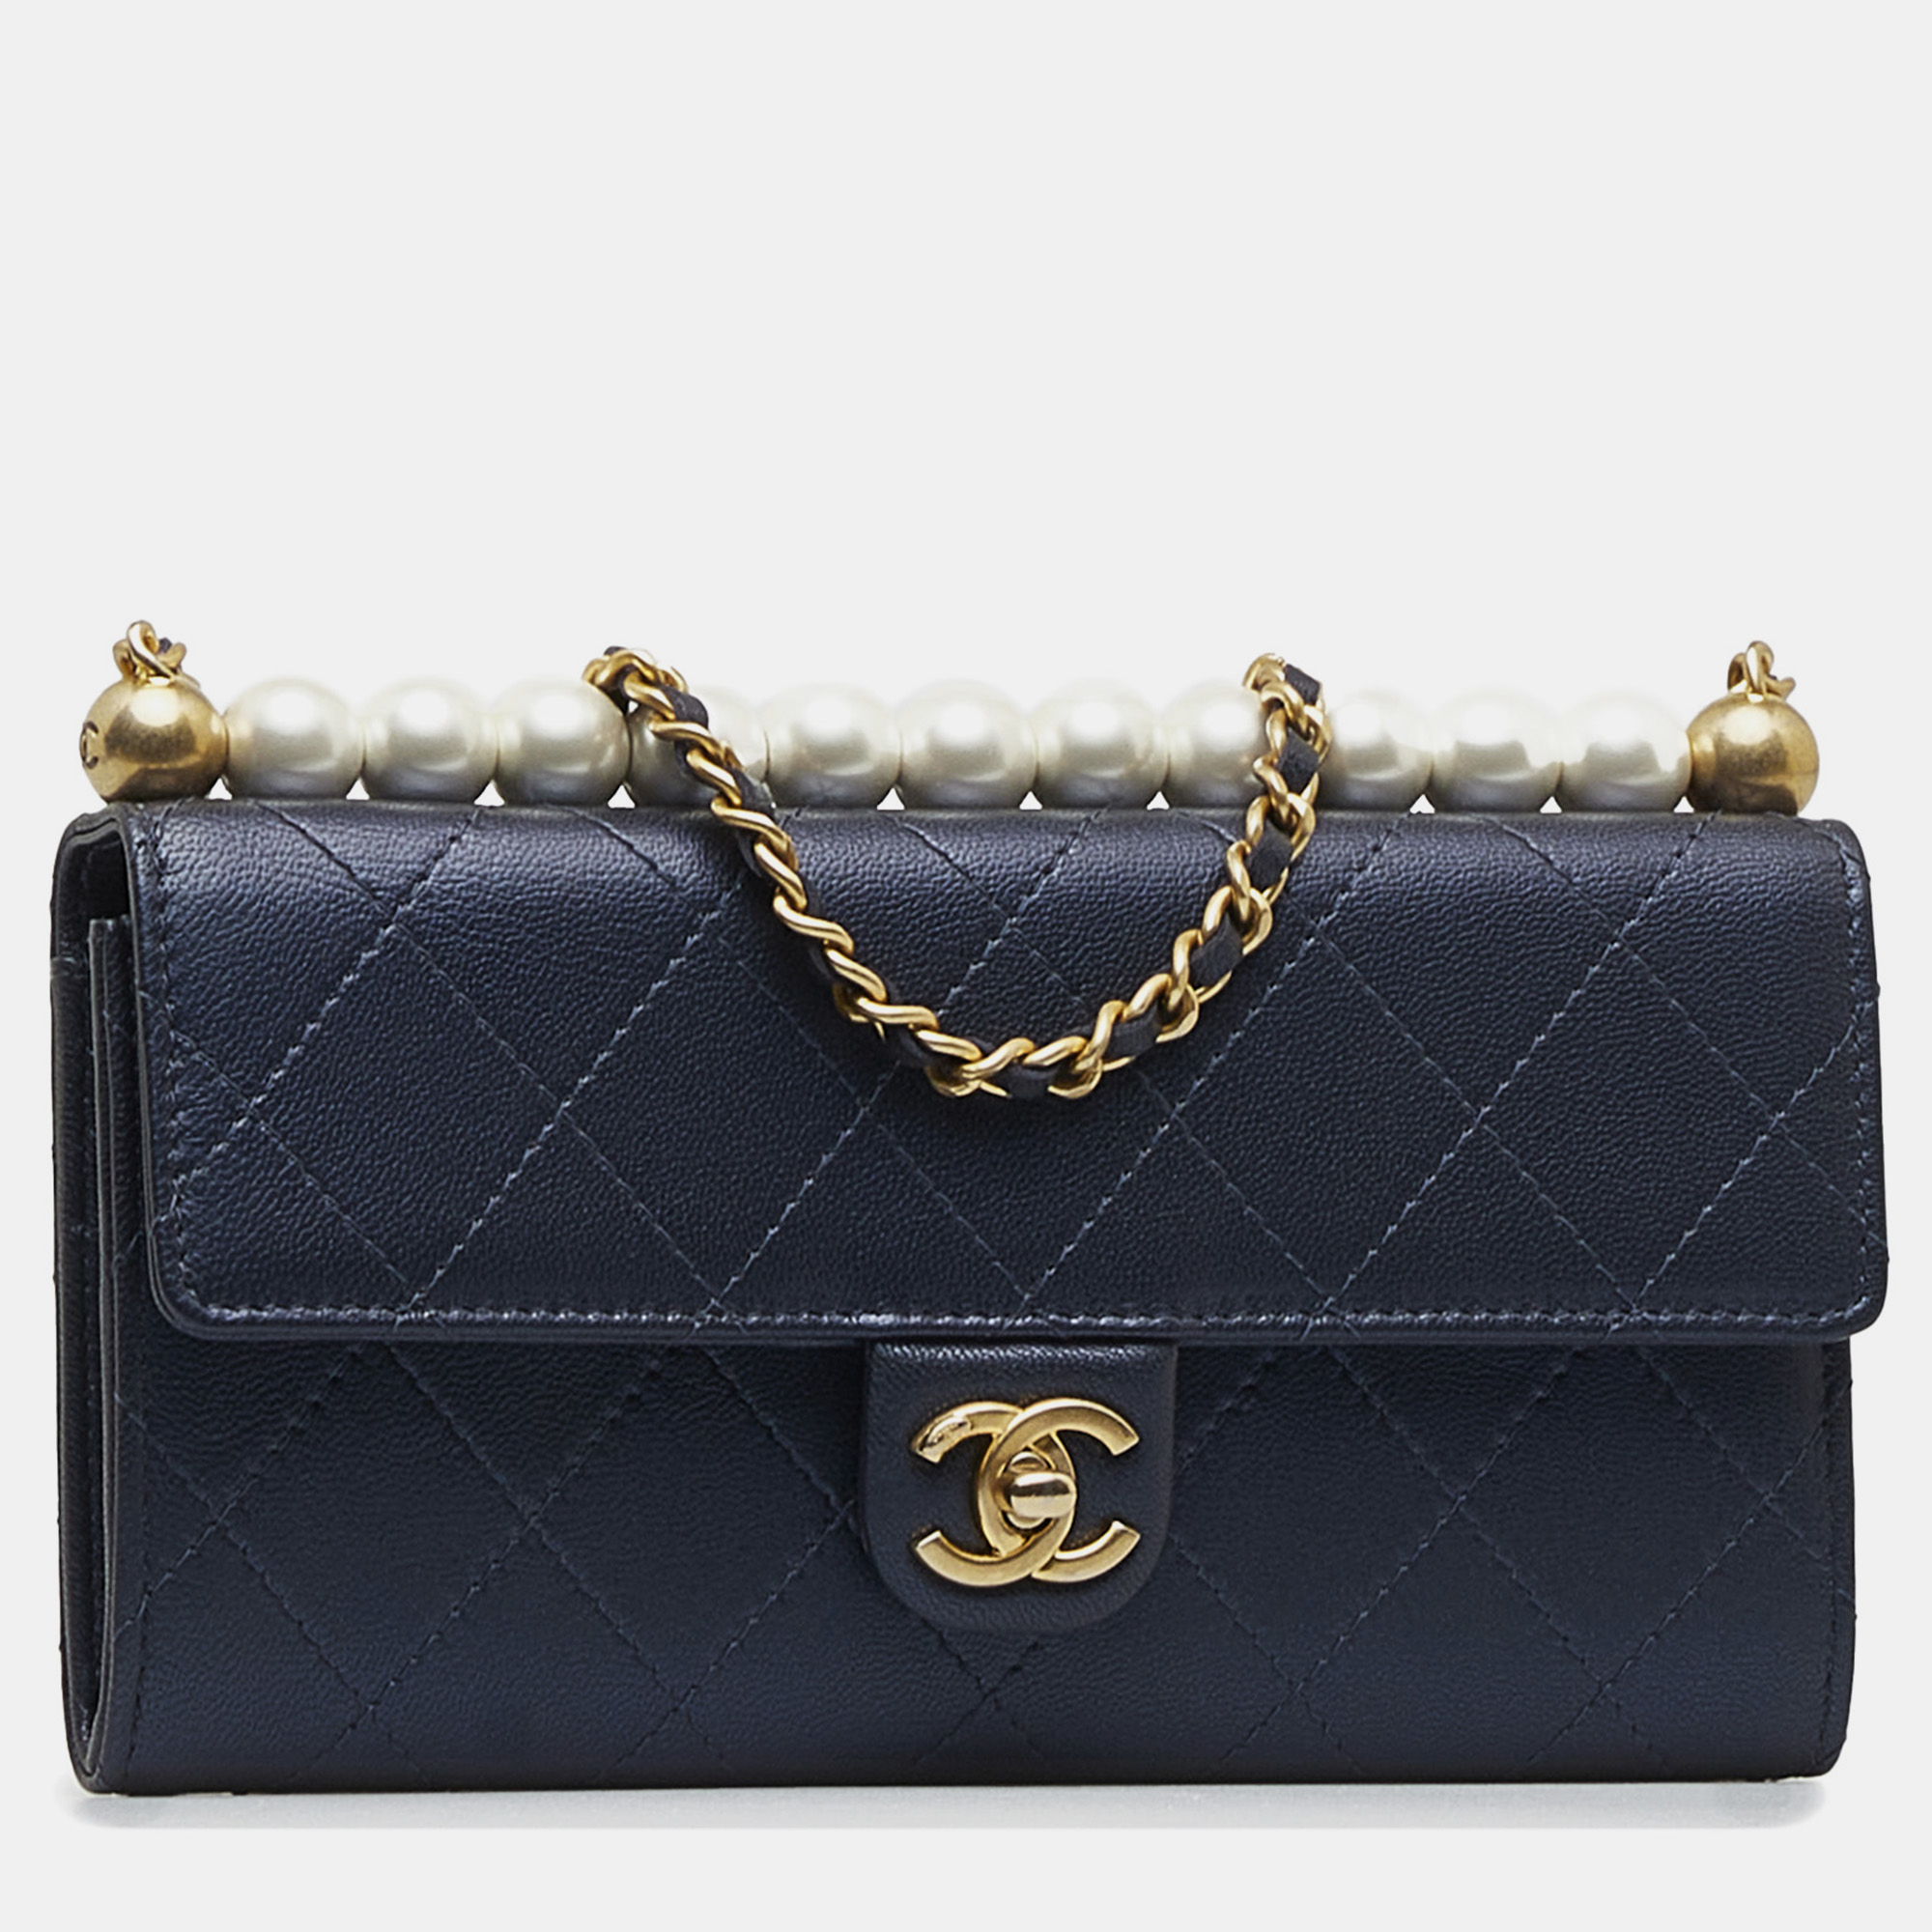 Chanel Navyblue Goatskin Chic Pearls Clutch With Chain Chanel